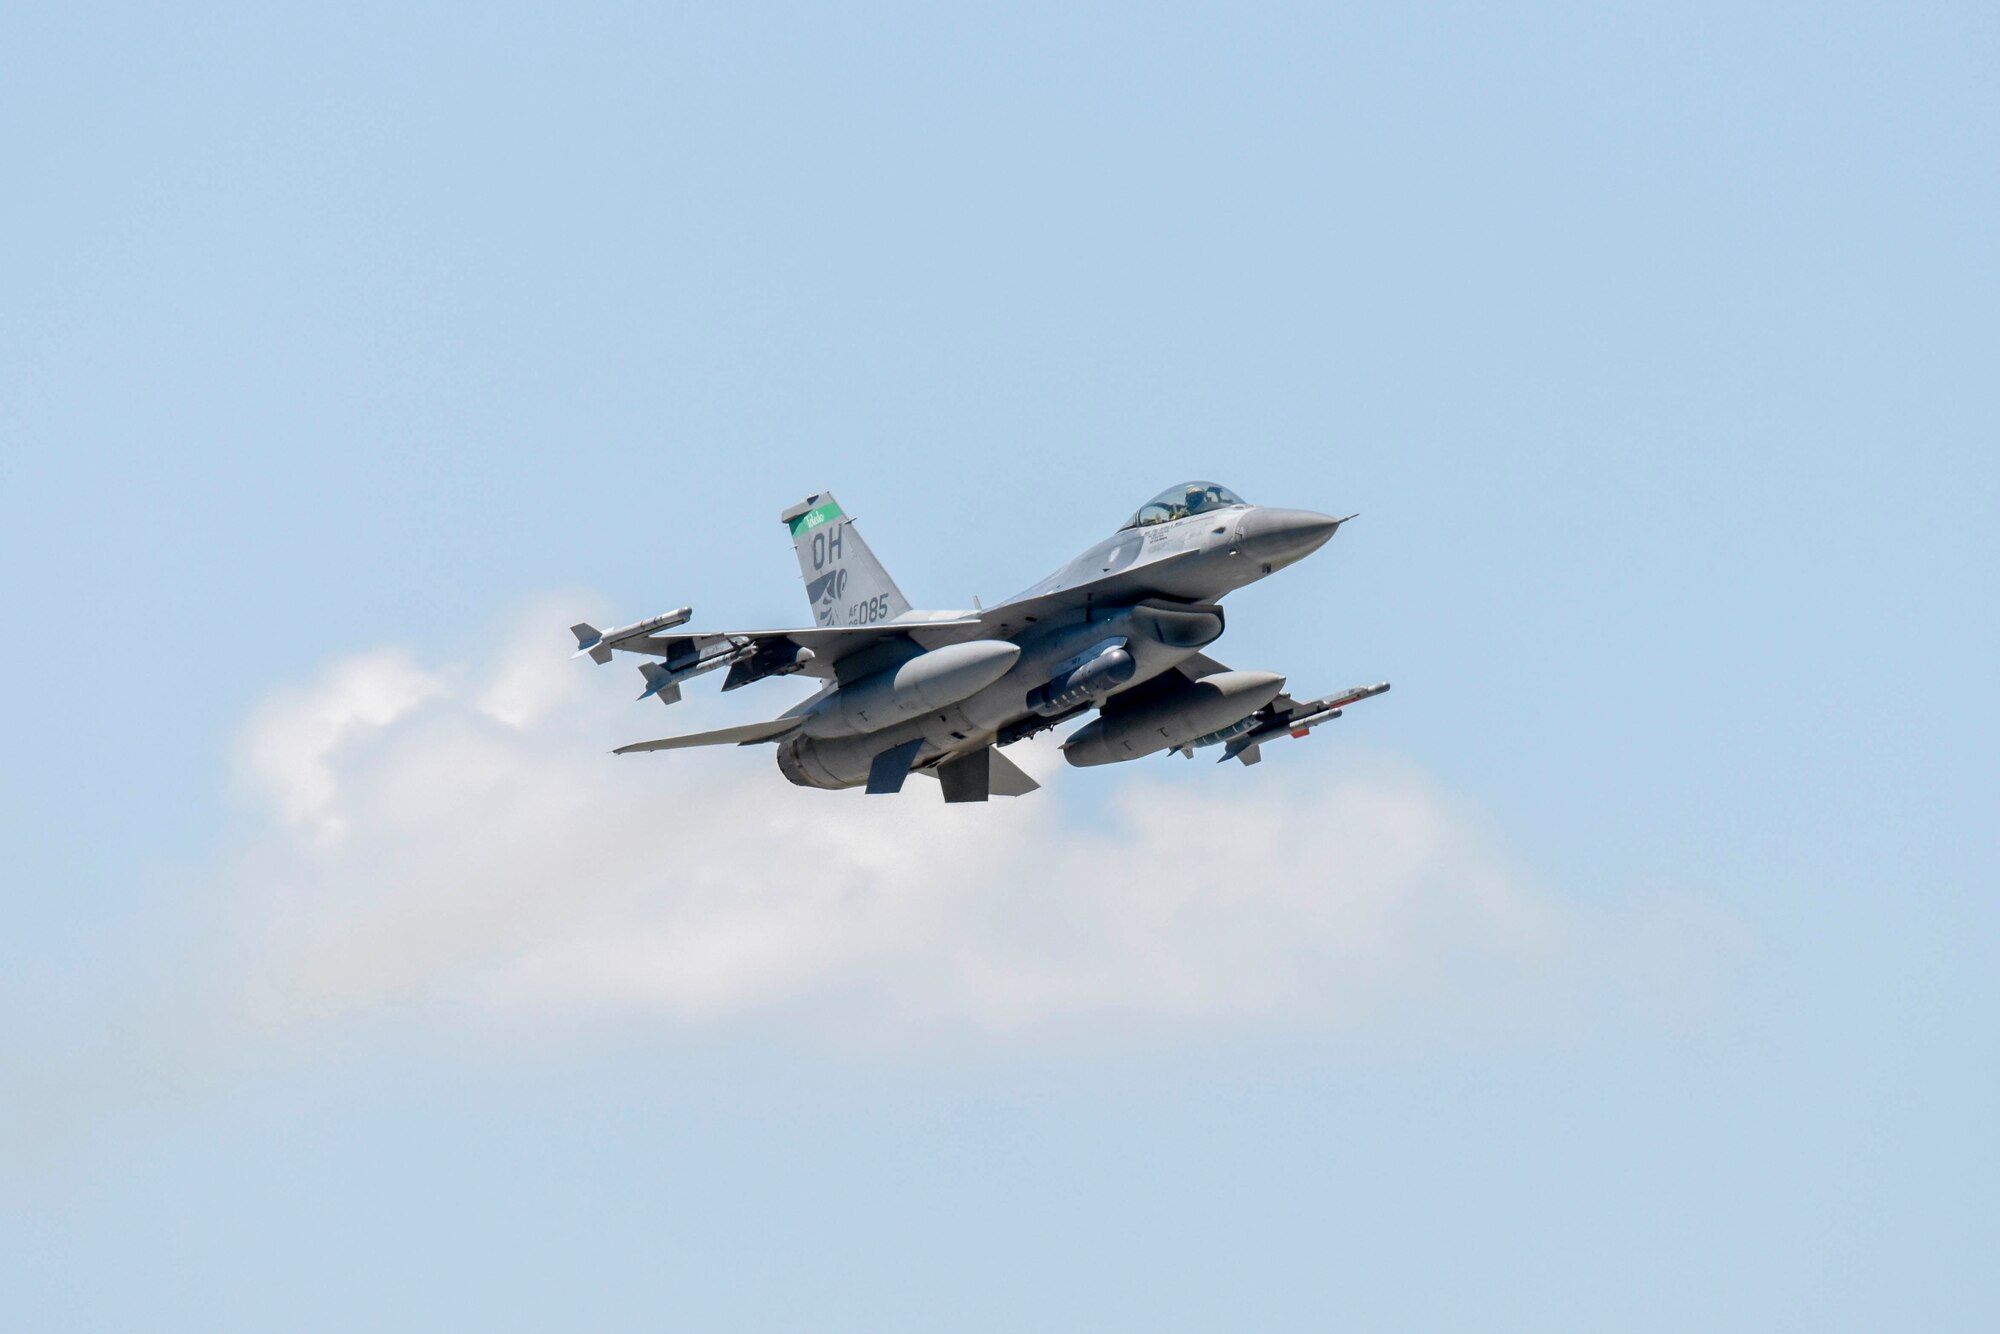 An F-16 Fighting Falcon, assigned to the Ohio National Guard’s 180th Fighter Wing, takes off during a training flight at the 180FW in Swanton, Ohio, June 30, 2020.